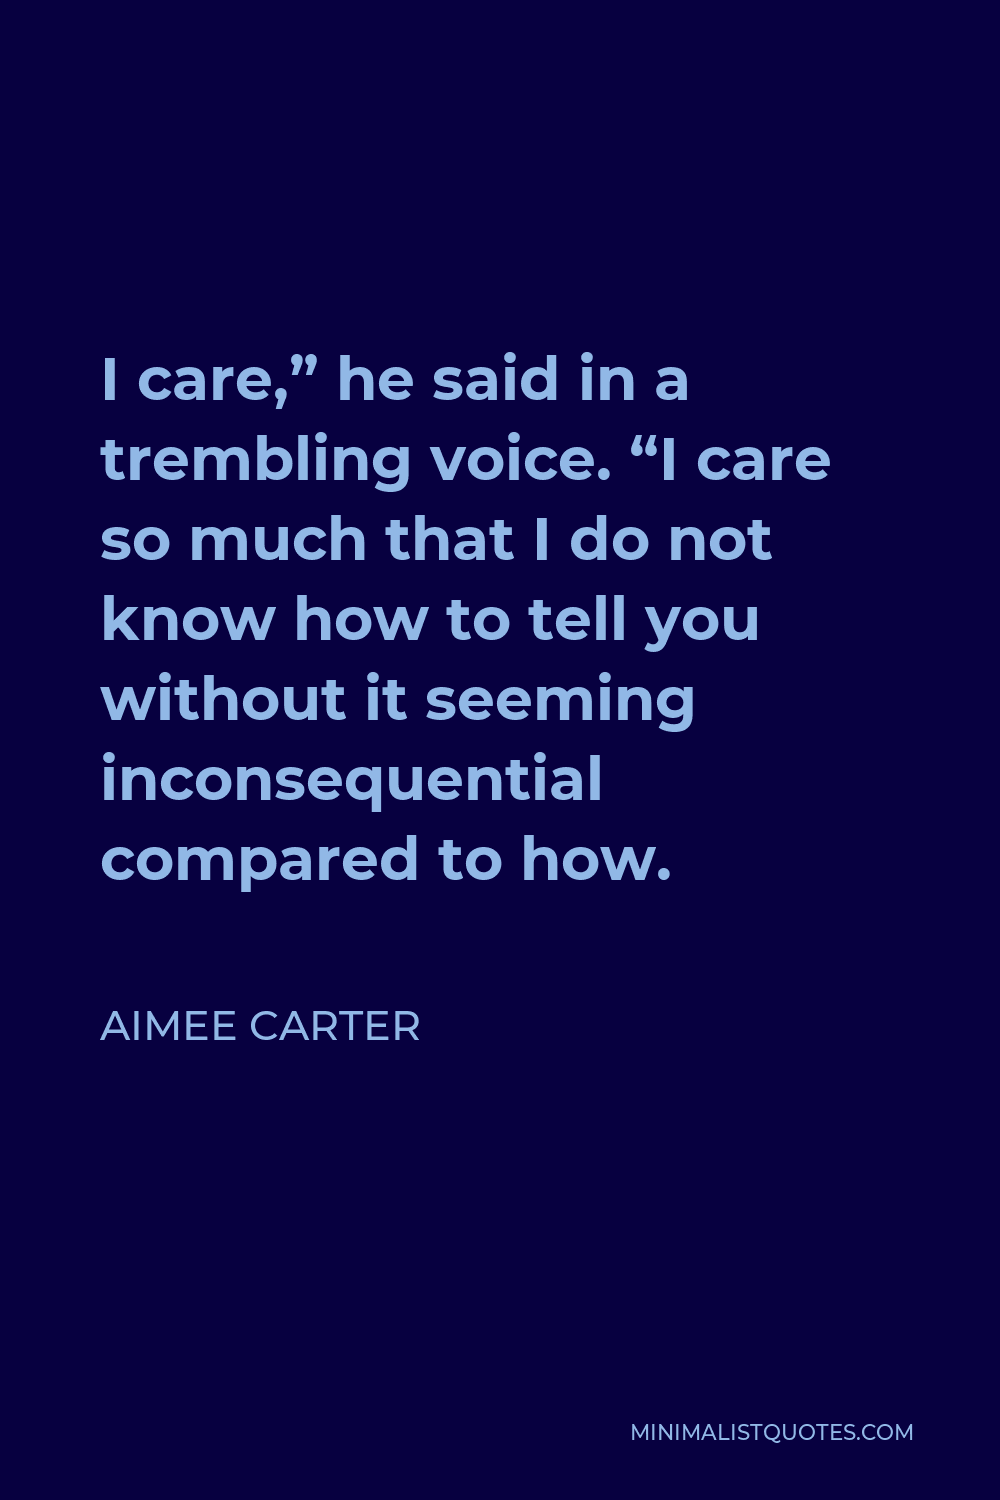 Aimee Carter Quote - I care,” he said in a trembling voice. “I care so much that I do not know how to tell you without it seeming inconsequential compared to how.